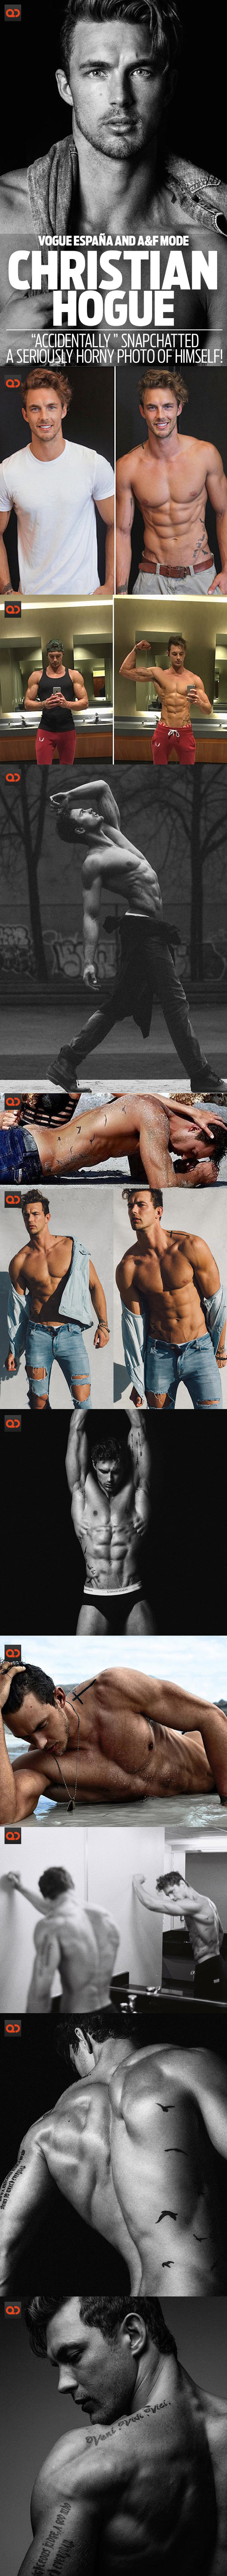 Christian Hogue, Vogue España And A&F Model, “Accidentally ” Snapchatted A Seriously Horny Photo!